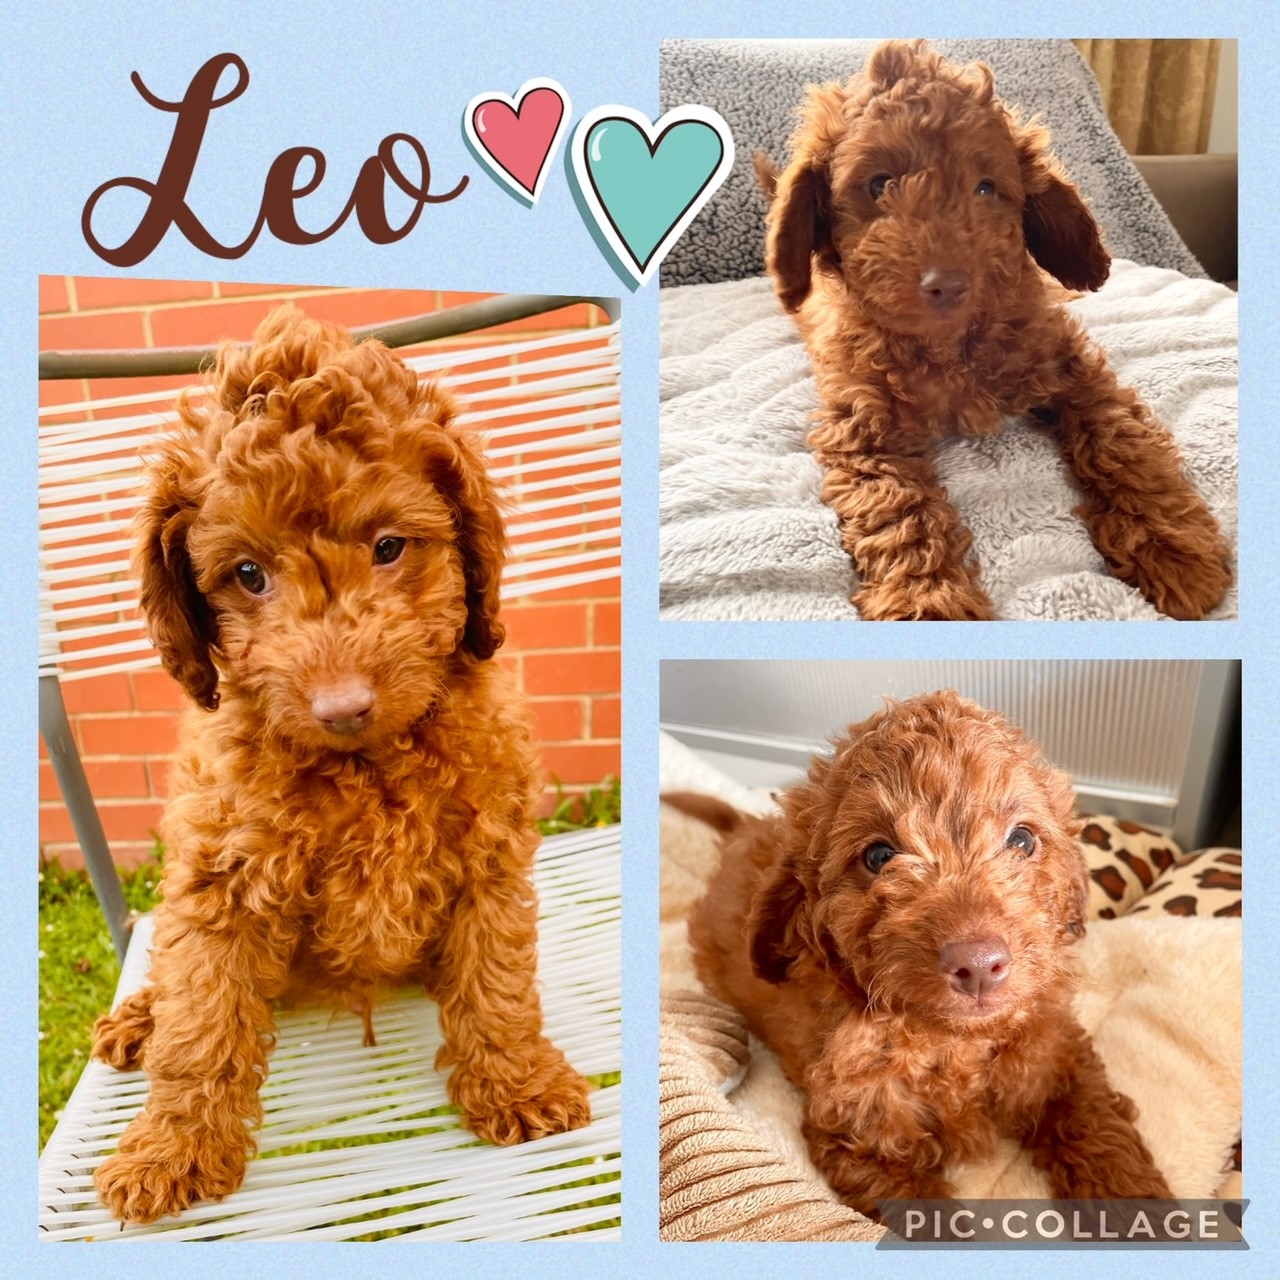 Gorgeous Teddy Toy Cavoodles